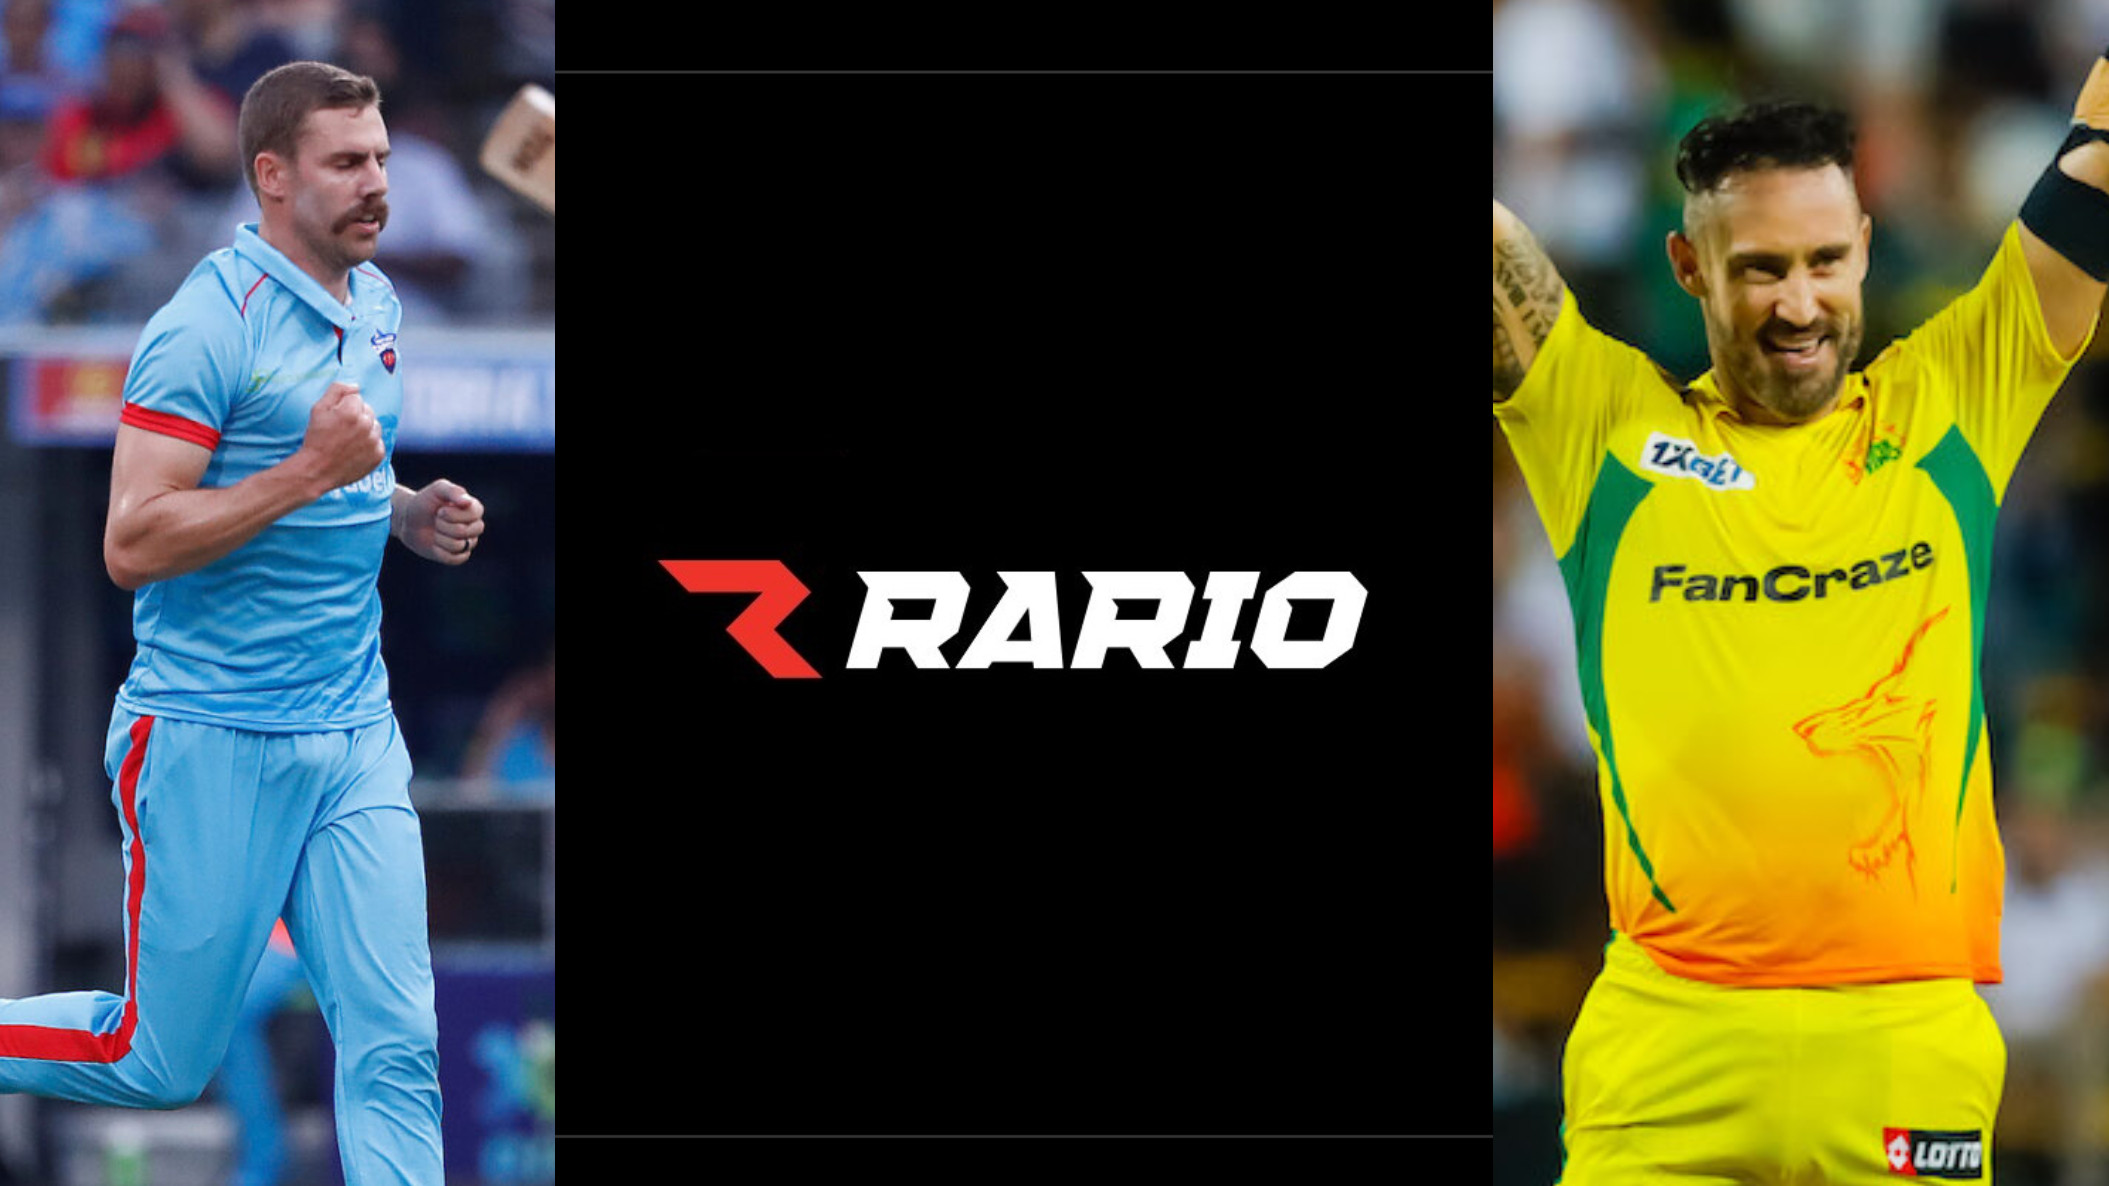 Rario D3 Predictions: Grab exciting player cards for RSA T20 League and play for great prizes